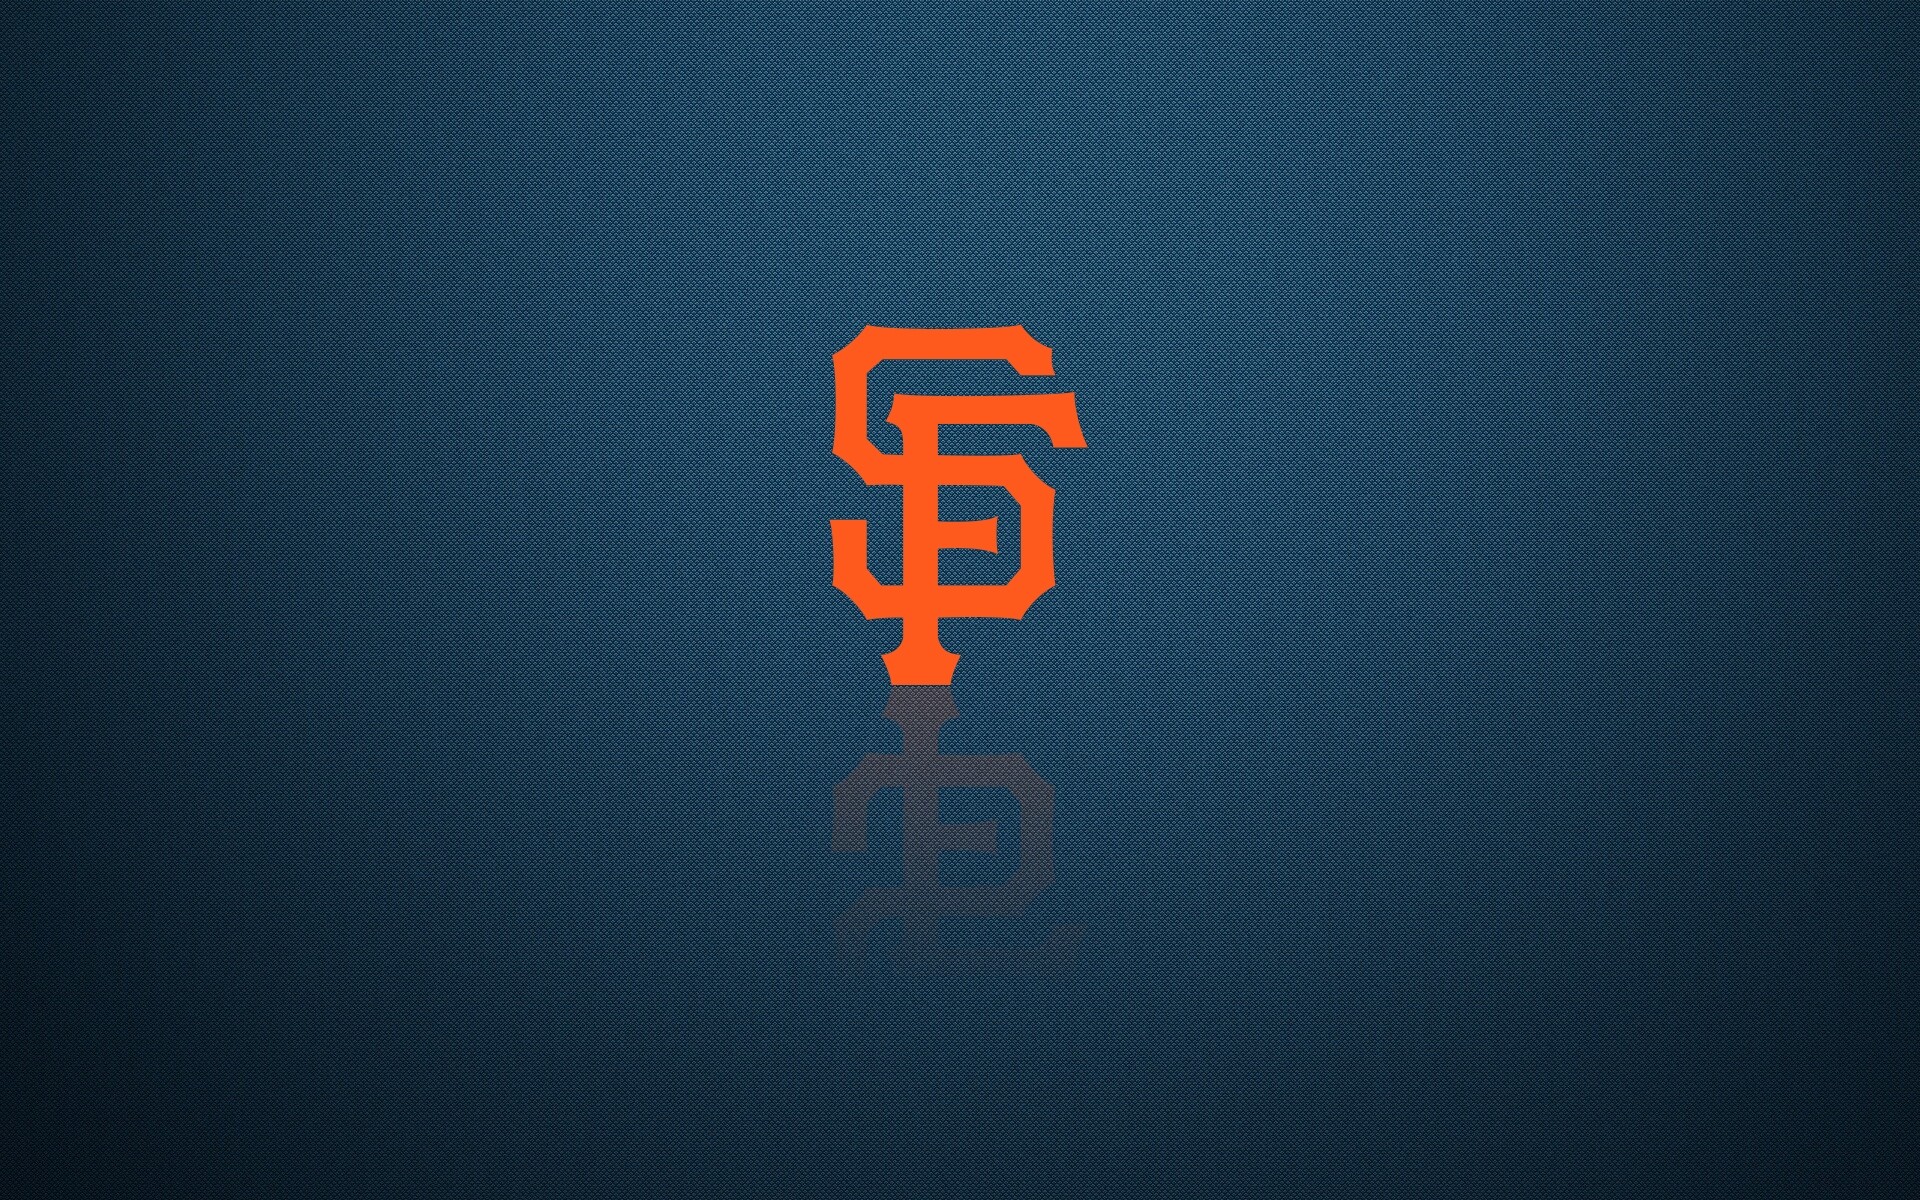 San Francisco Giants: Five-time World Series championships winners, The Baseball Hall of Fame members. 1920x1200 HD Background.